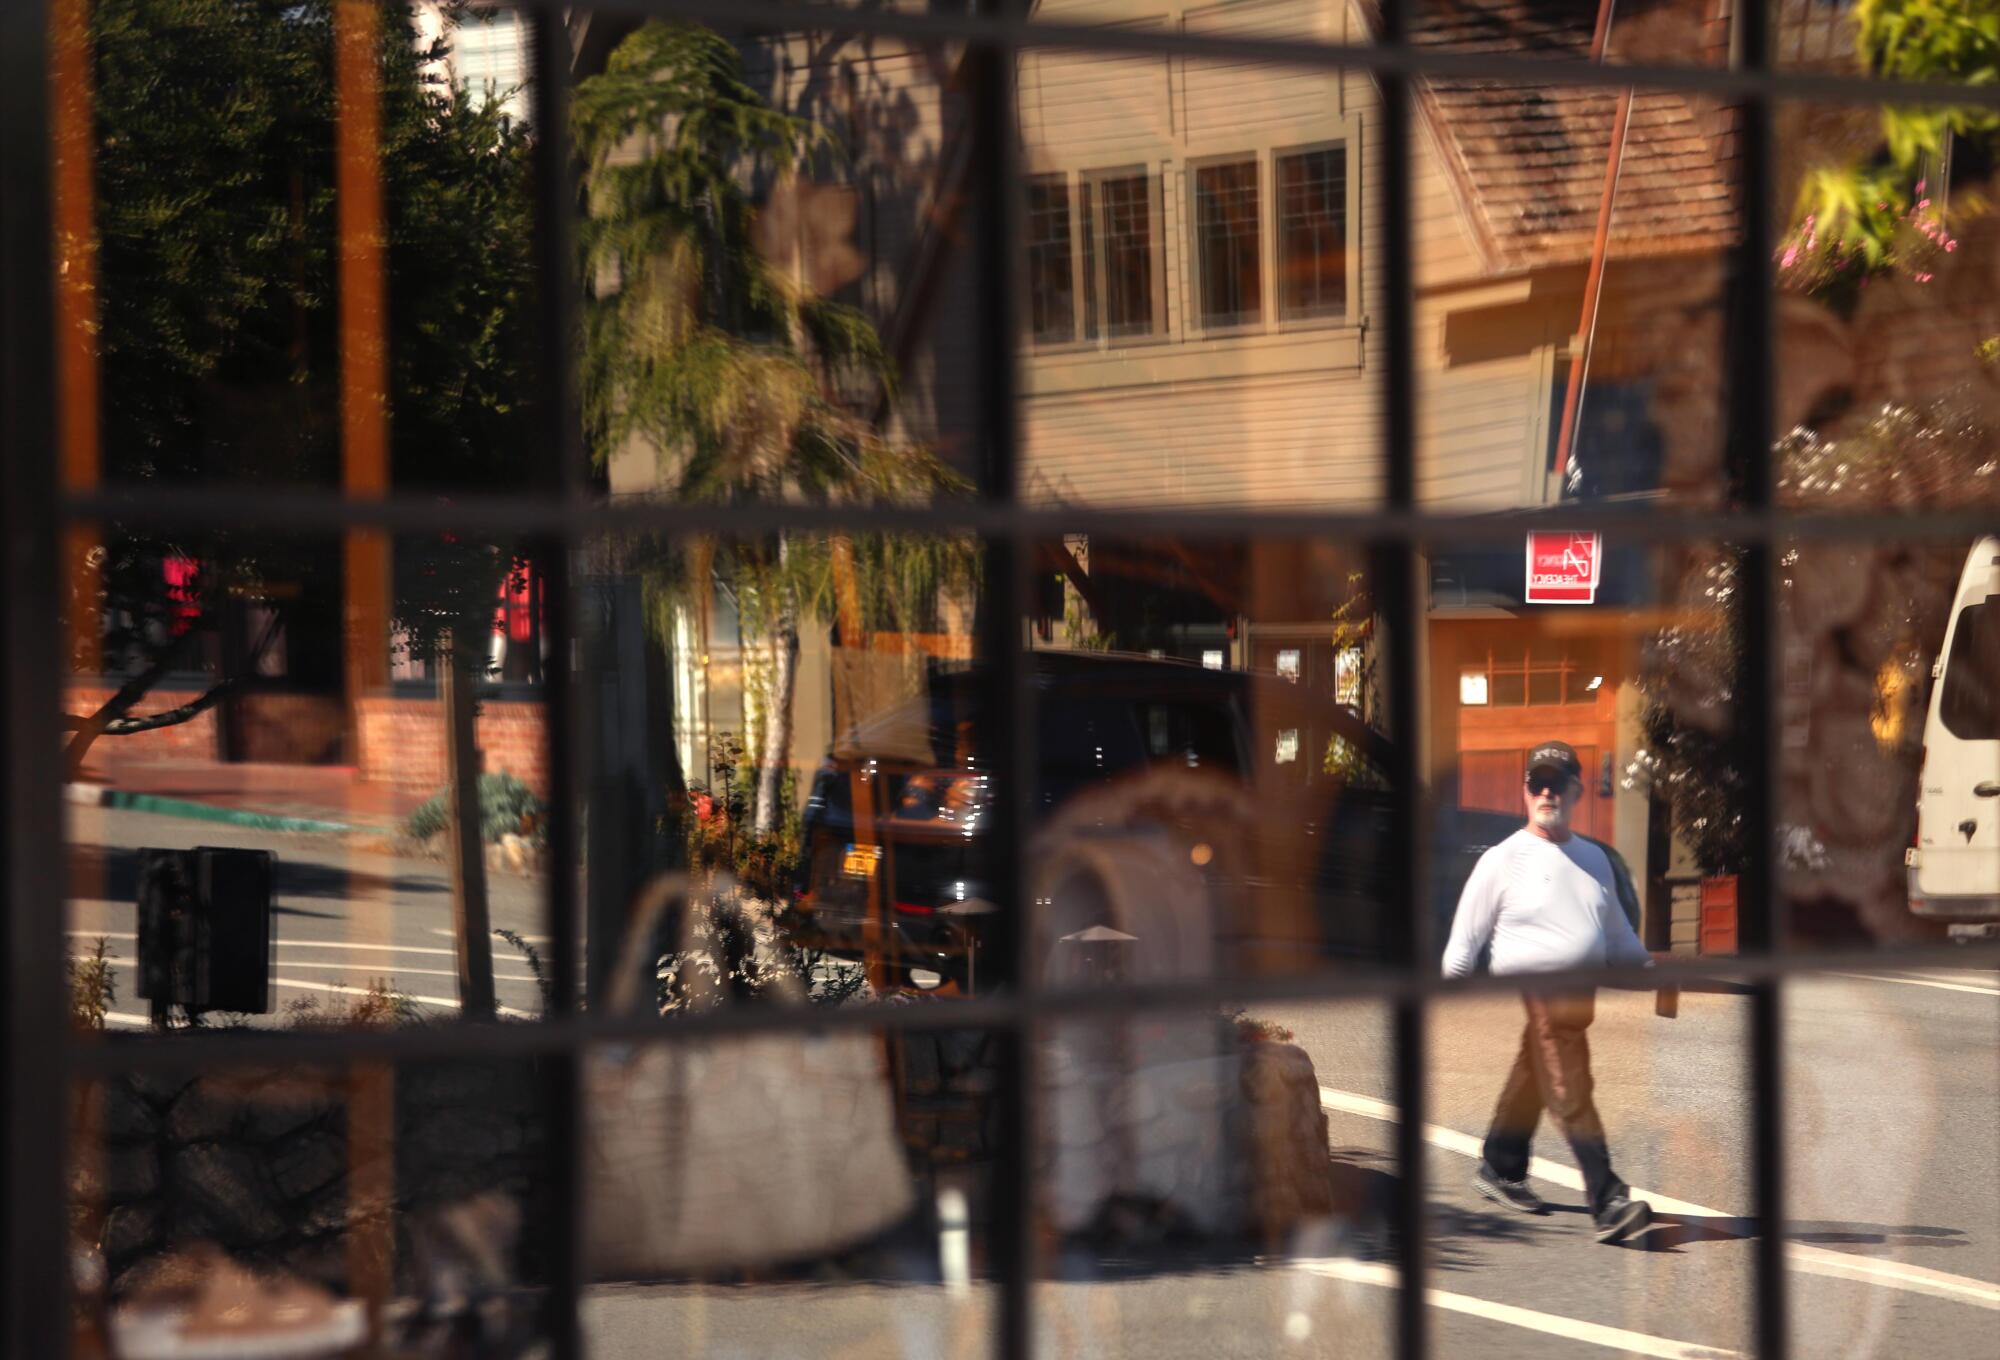 A pedestrian is caught in a reflection of a storefront window.